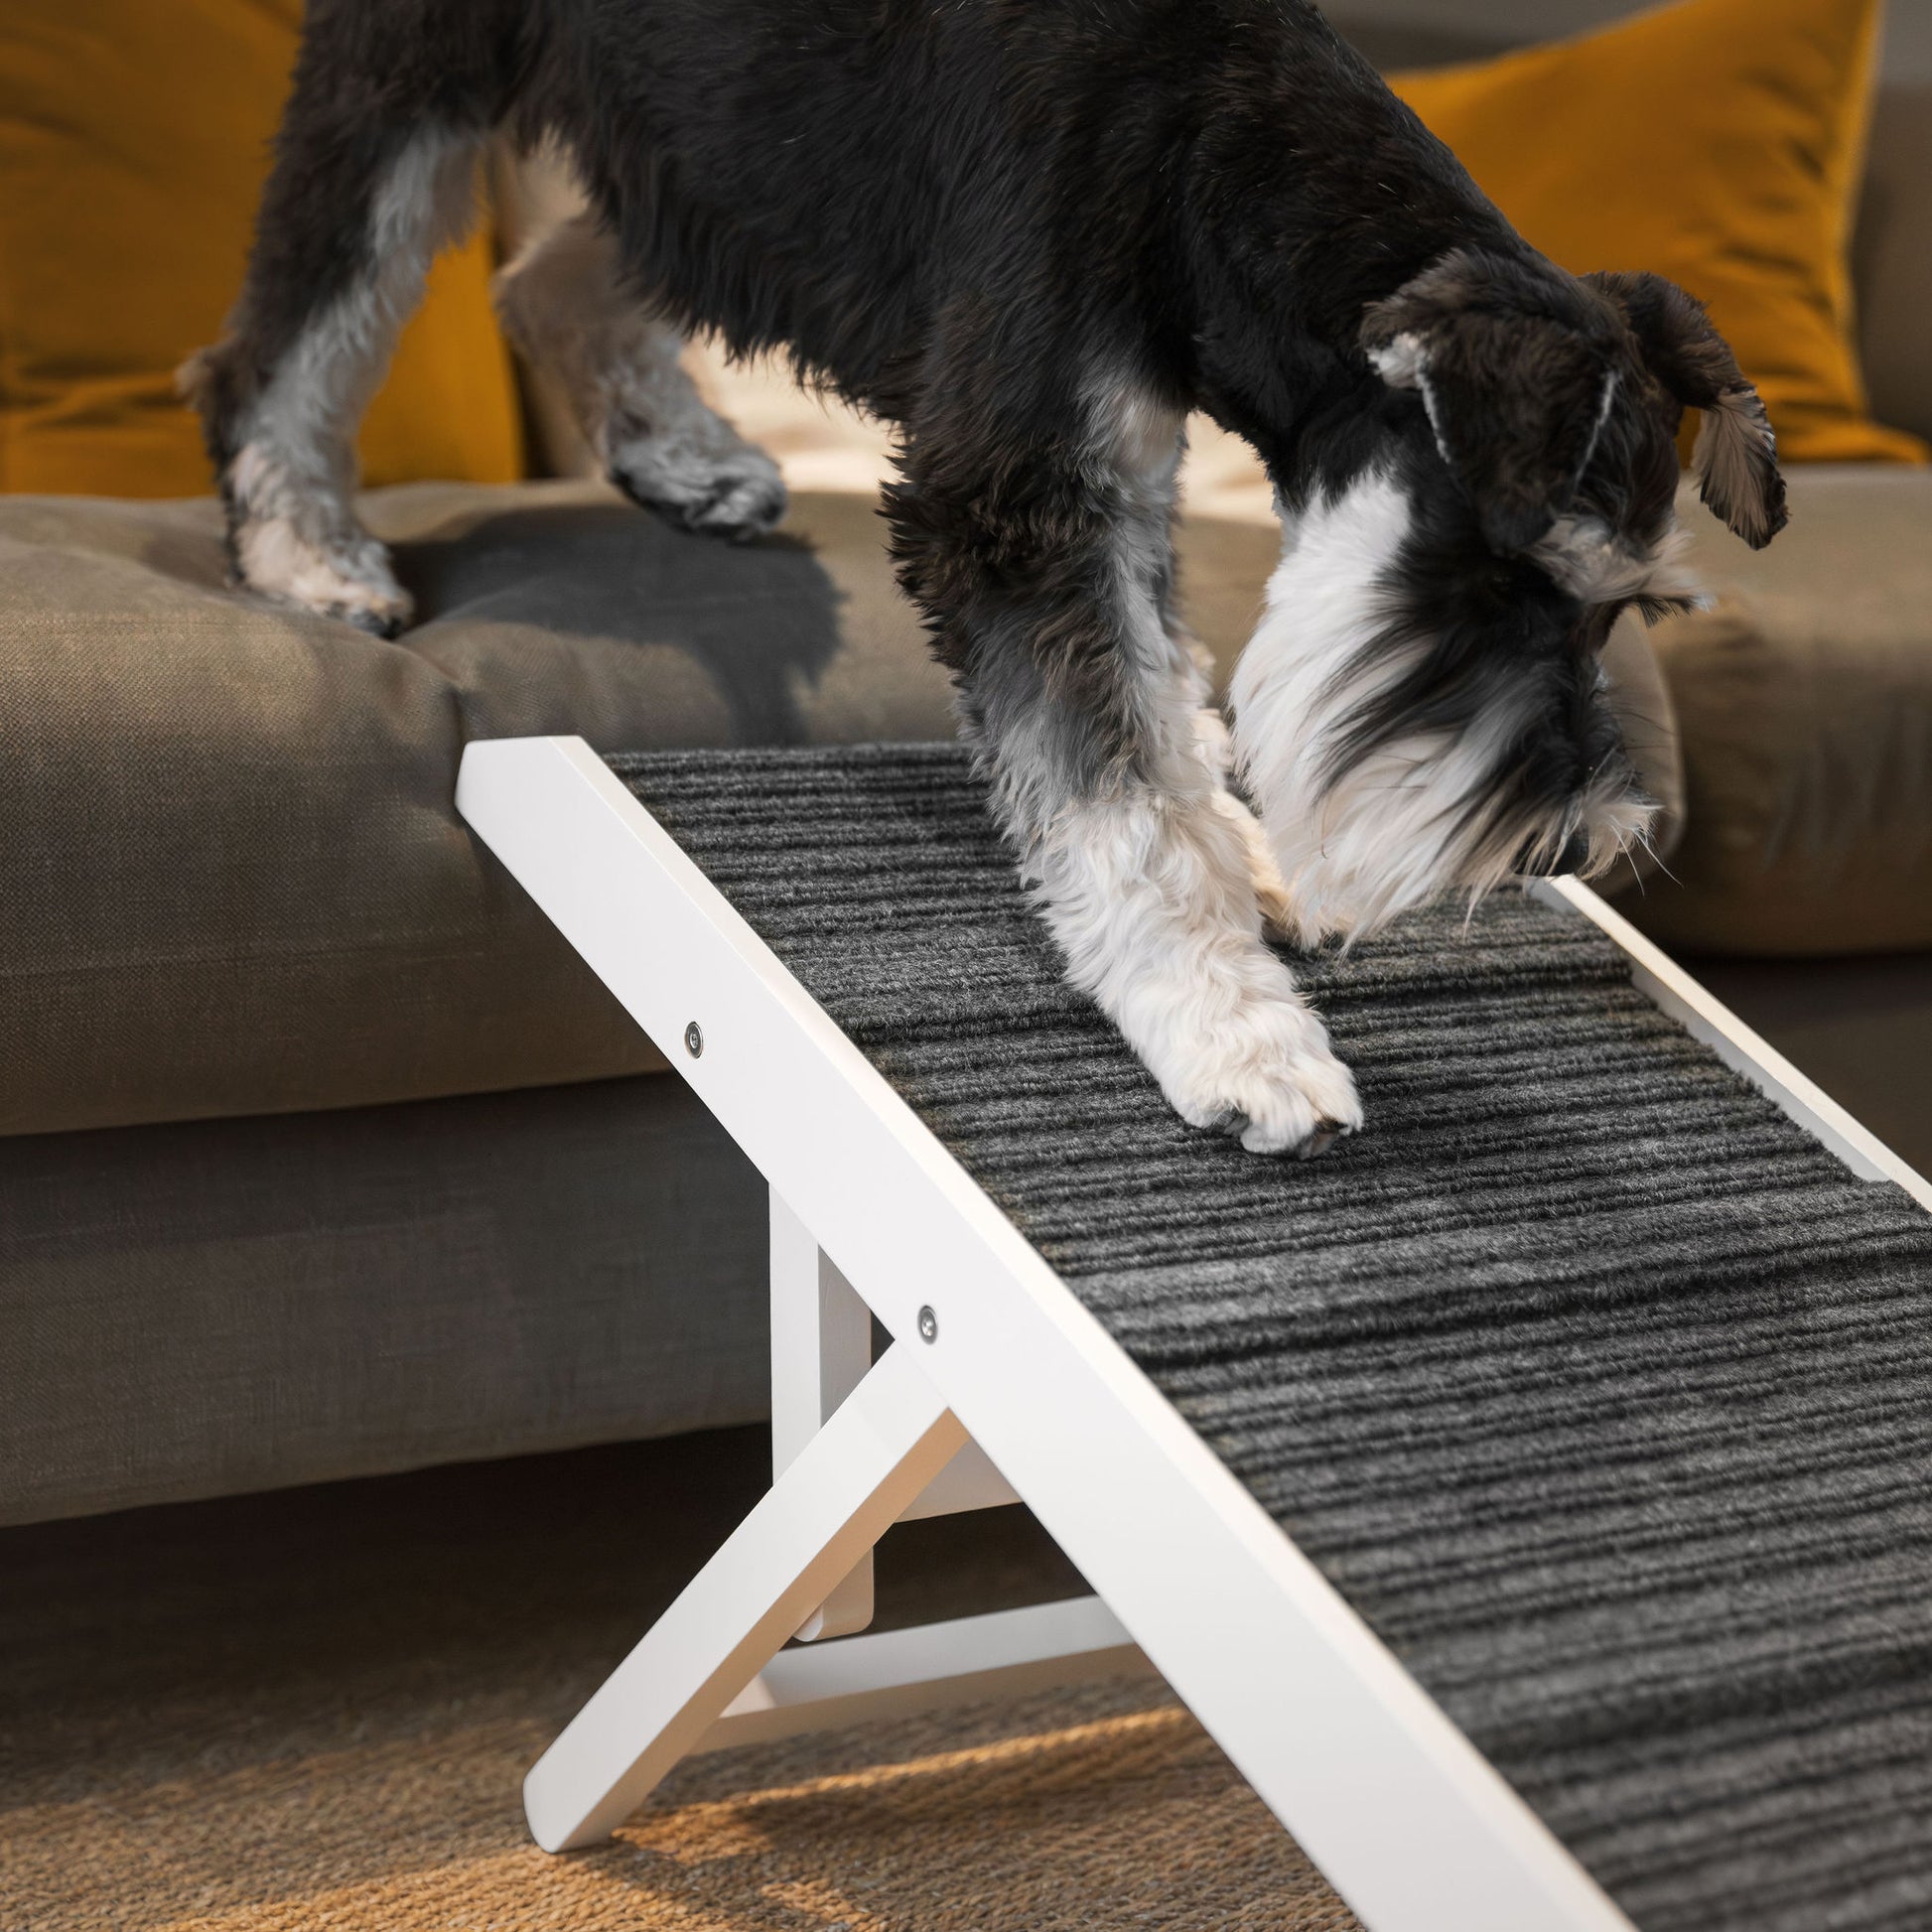 Discover the perfect pet furniture to help aid your furry friend, our super-strong dog ramp provides the ultimate comfort when climbing to join you on the couch! Featuring grooves for extra grip! Perfect for injured pets, puppy training and elderly dogs! Available now in 2 stylish colors at Lords & Labradors US